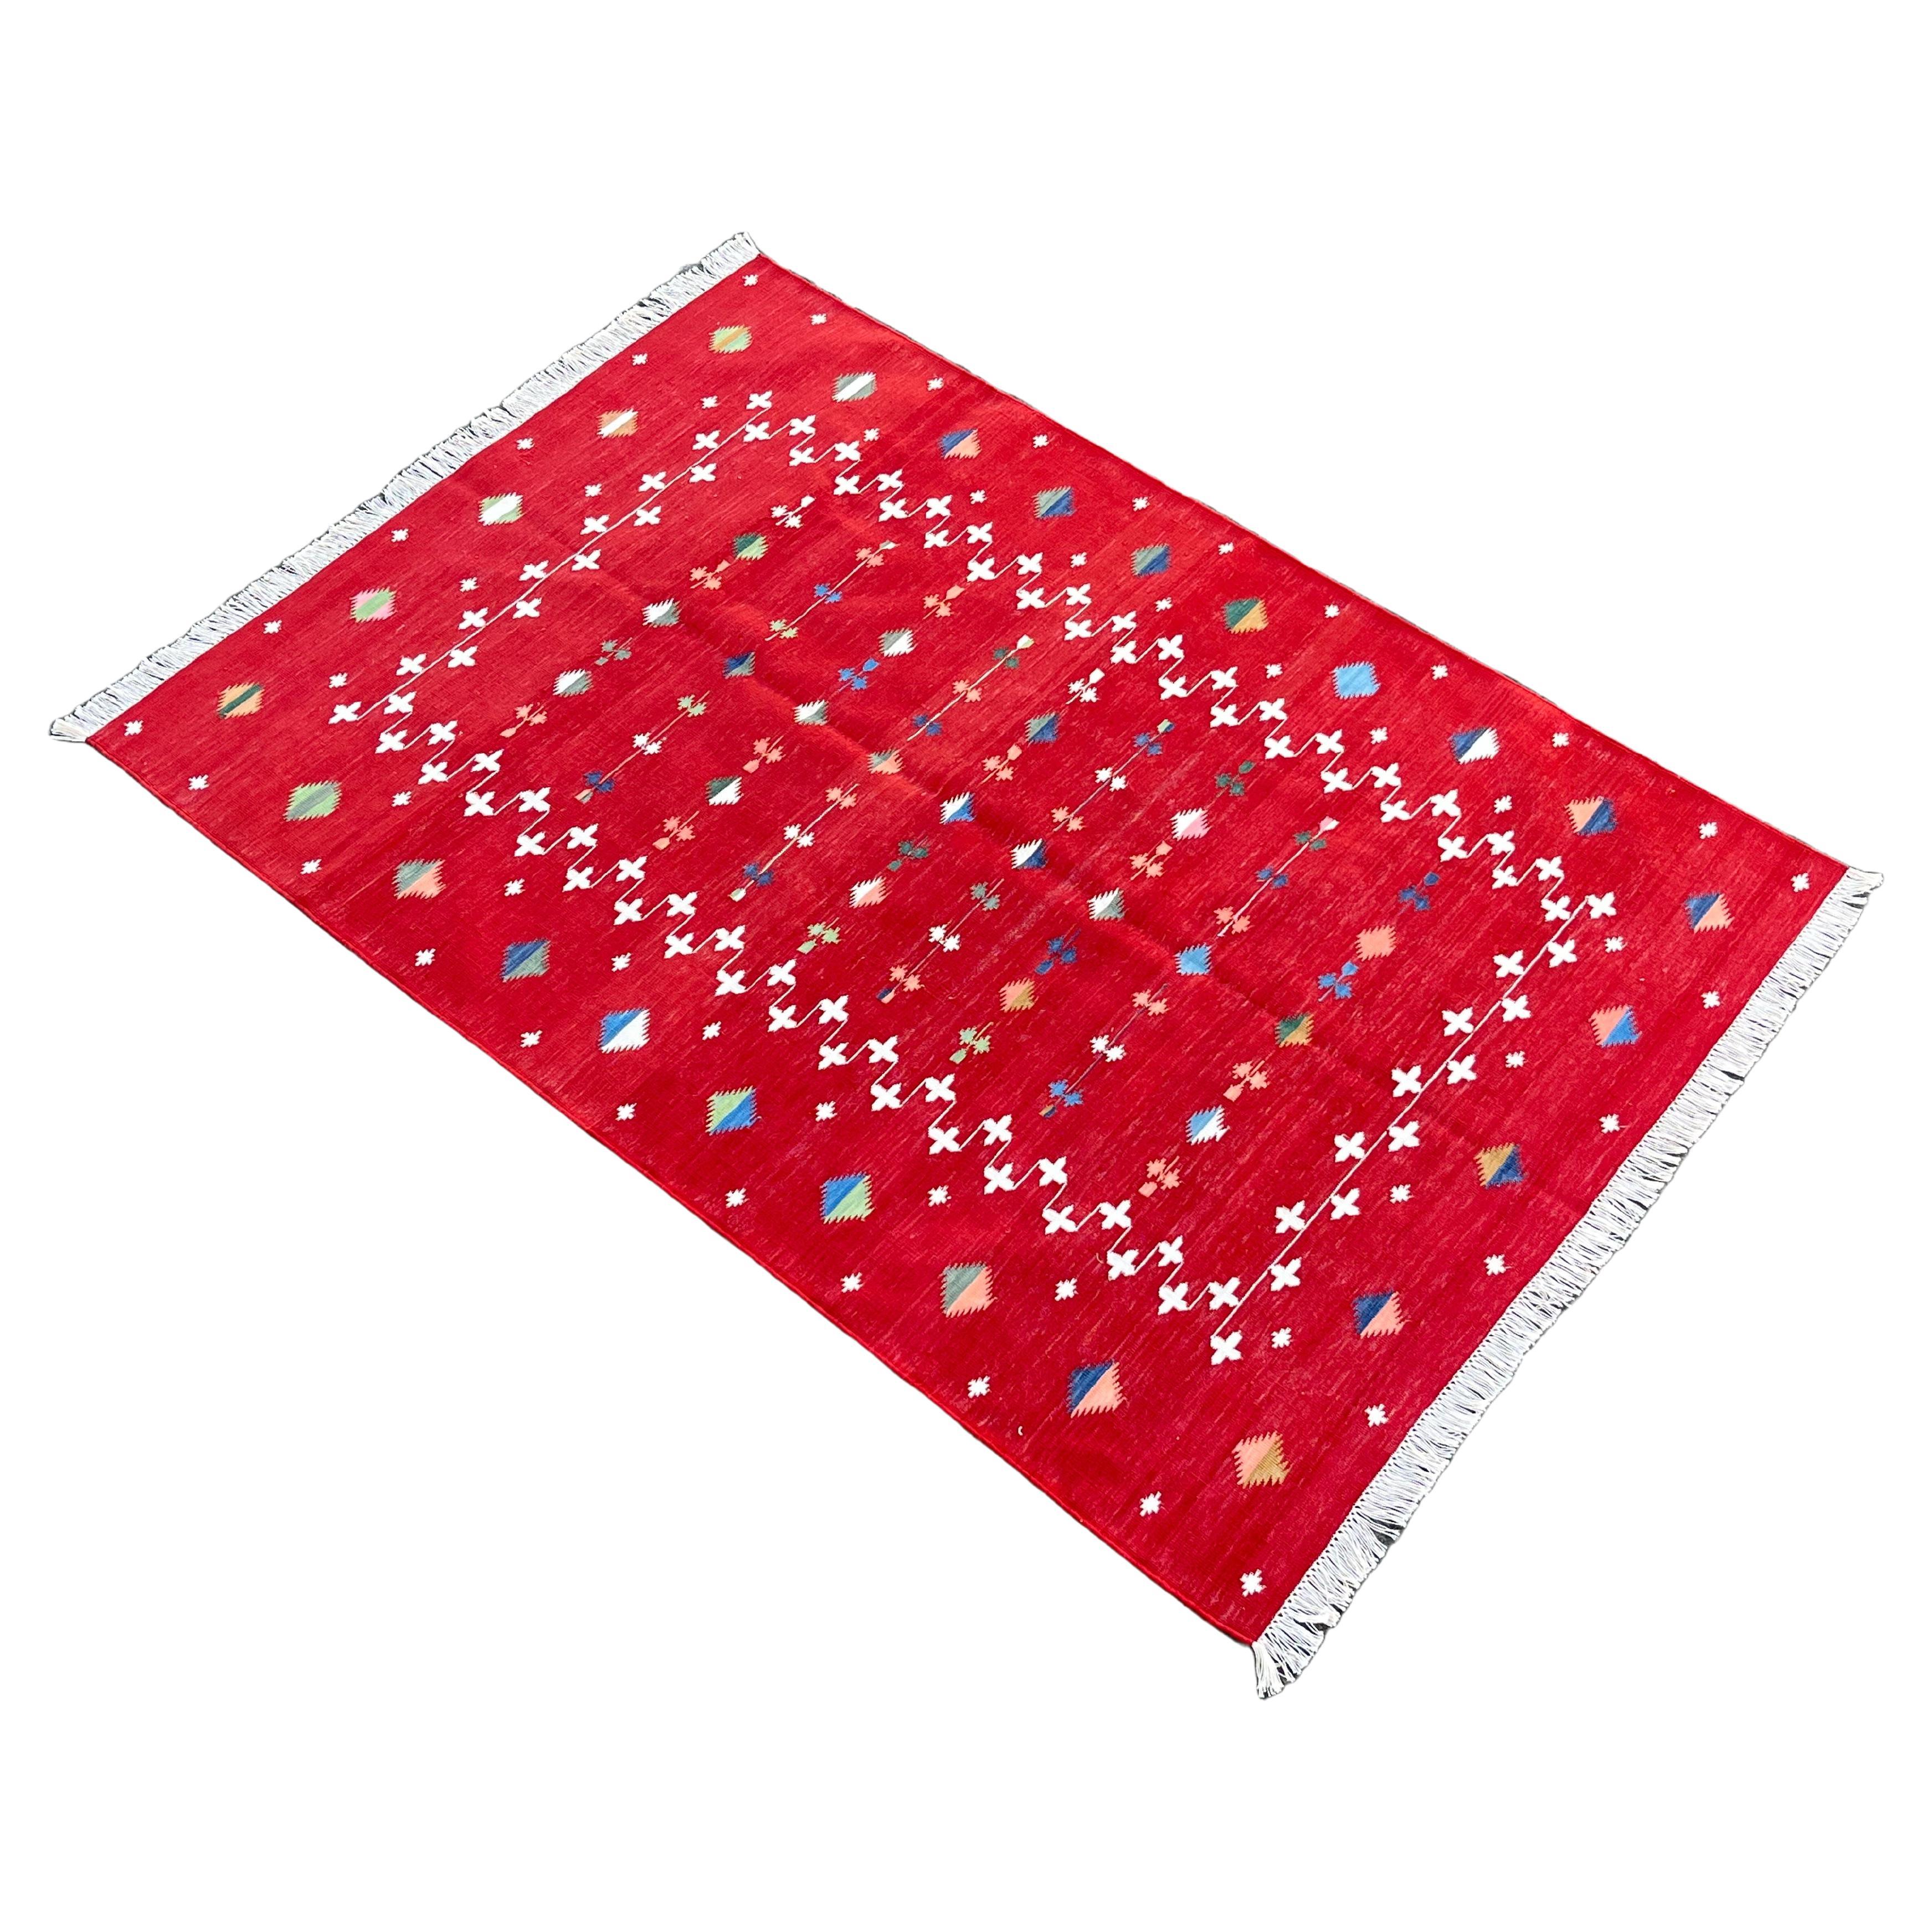 Handmade Cotton Area Flat Weave Rug, 4x6 Red And White Shooting Star Dhurrie Rug For Sale